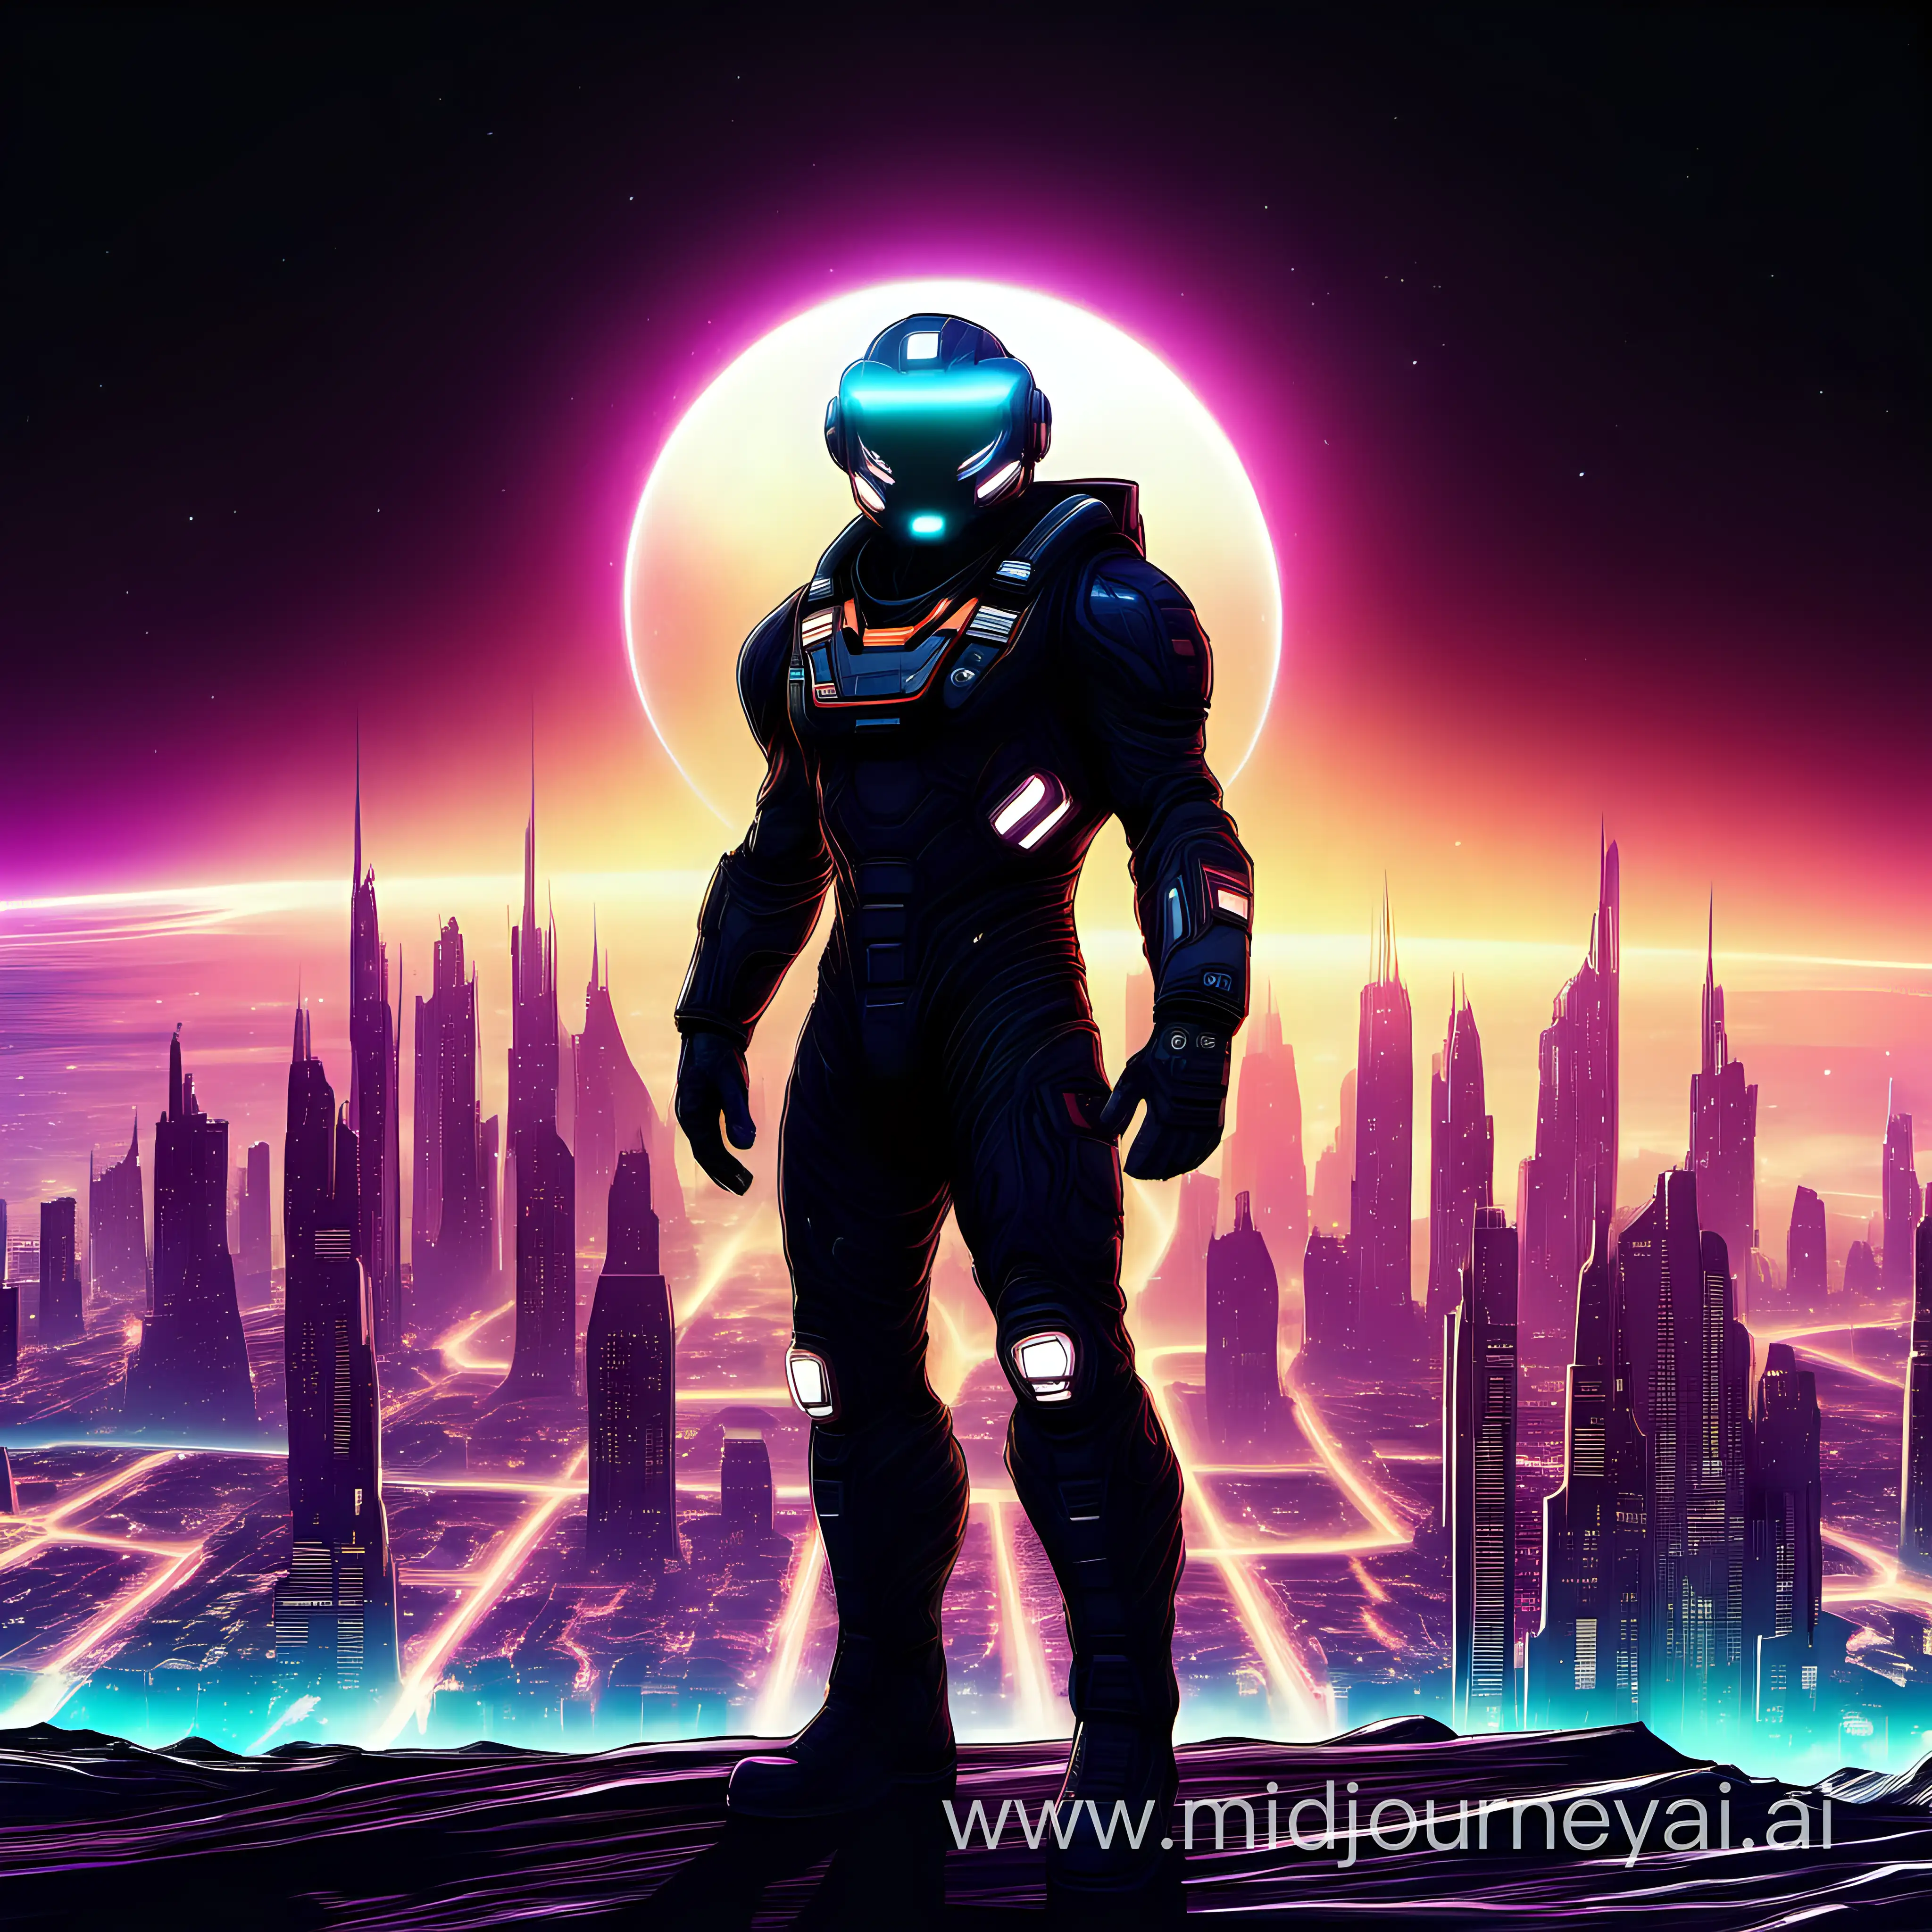 An interstellar warrior in a black spacesuit with a black visor covering his face. He stands in front of a glowing neon city in the distance but he faces the camera.